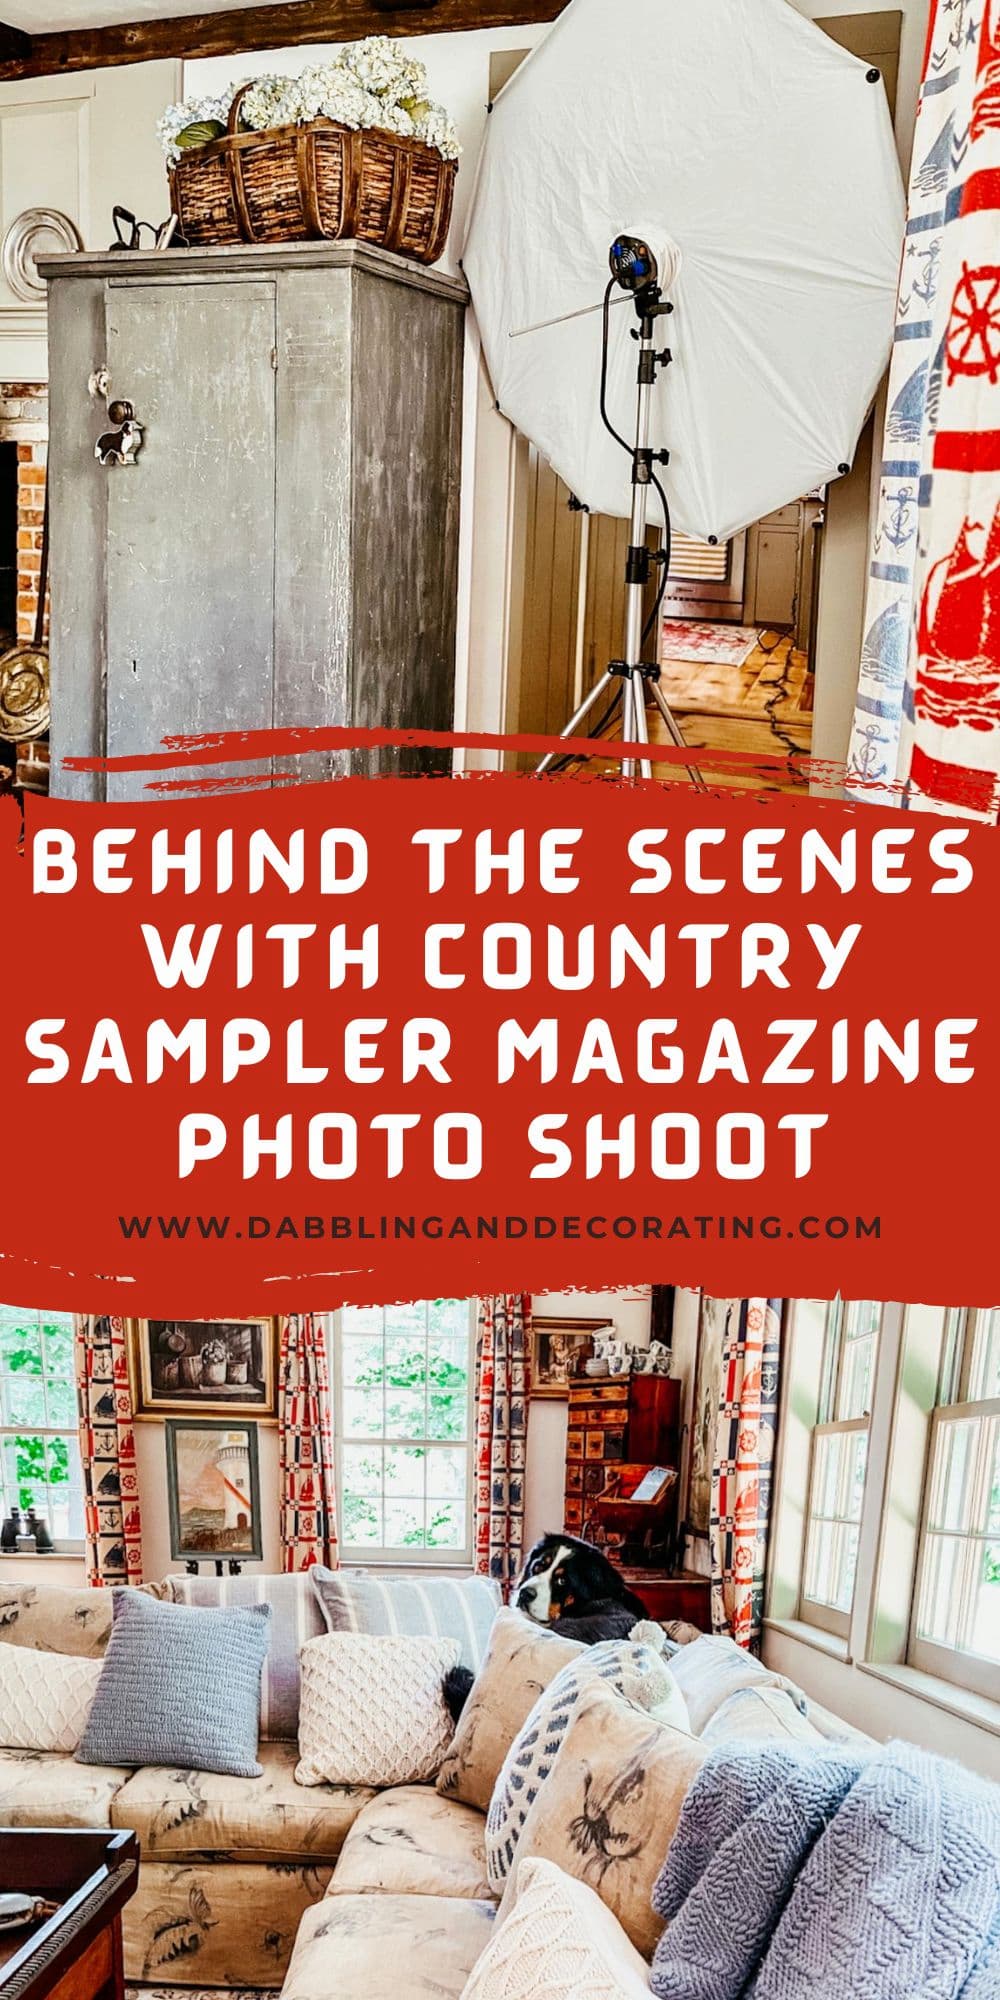 Behind the Scenes with Country Sampler Magazine Photo Shoot